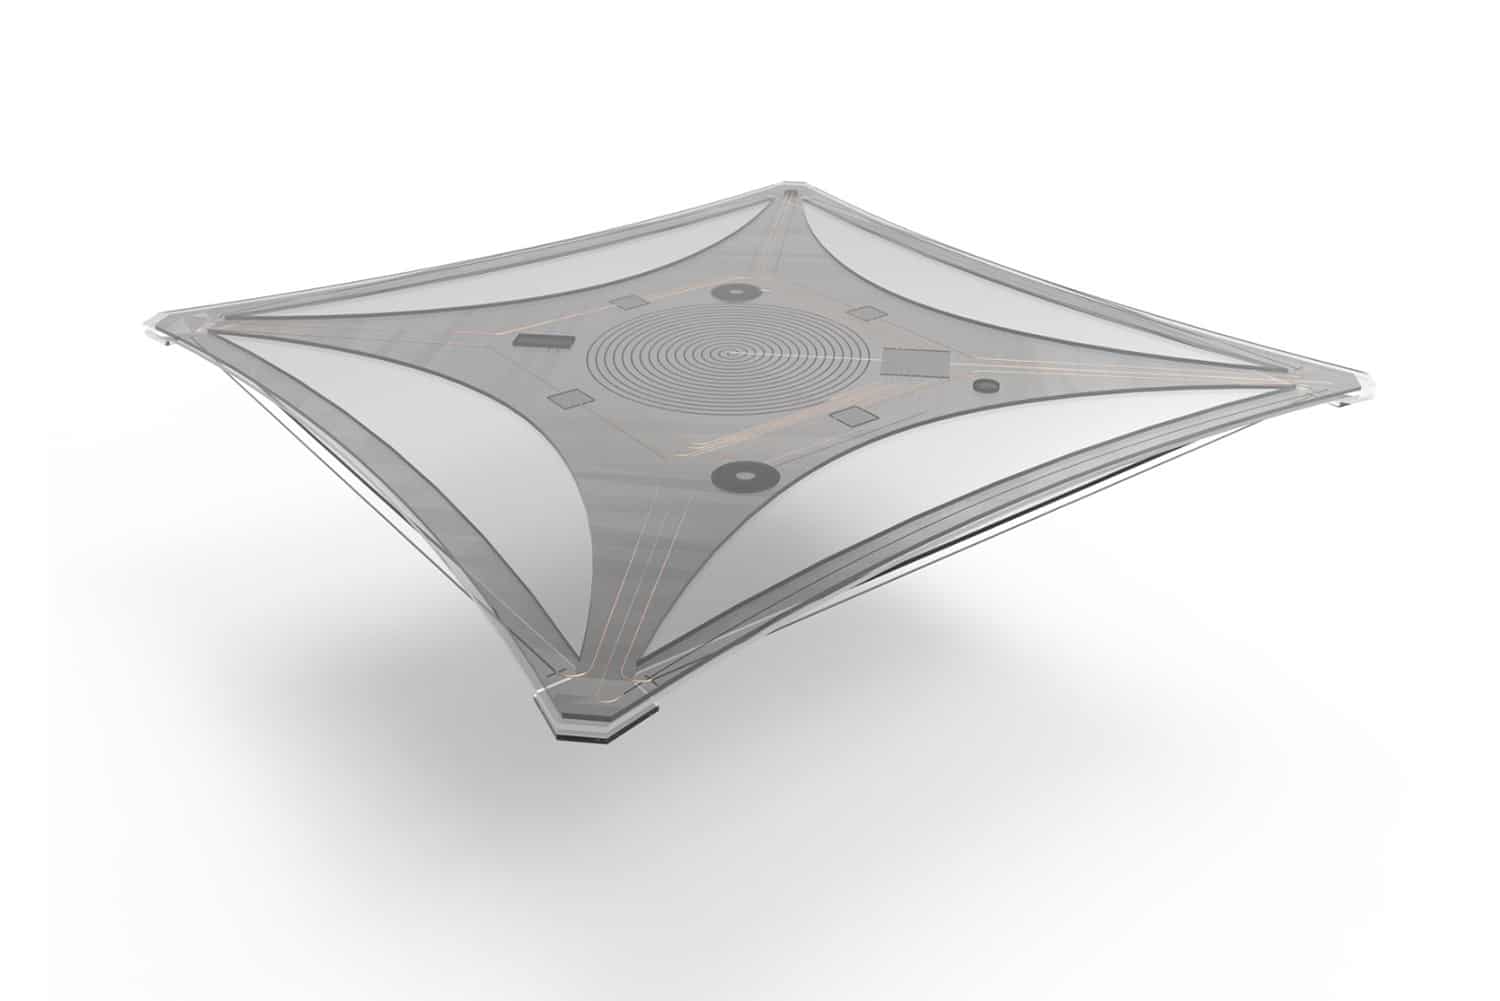 A flexible, shape-memory tray – laminated structure with integrated actuator, sensor technology and control electronics.